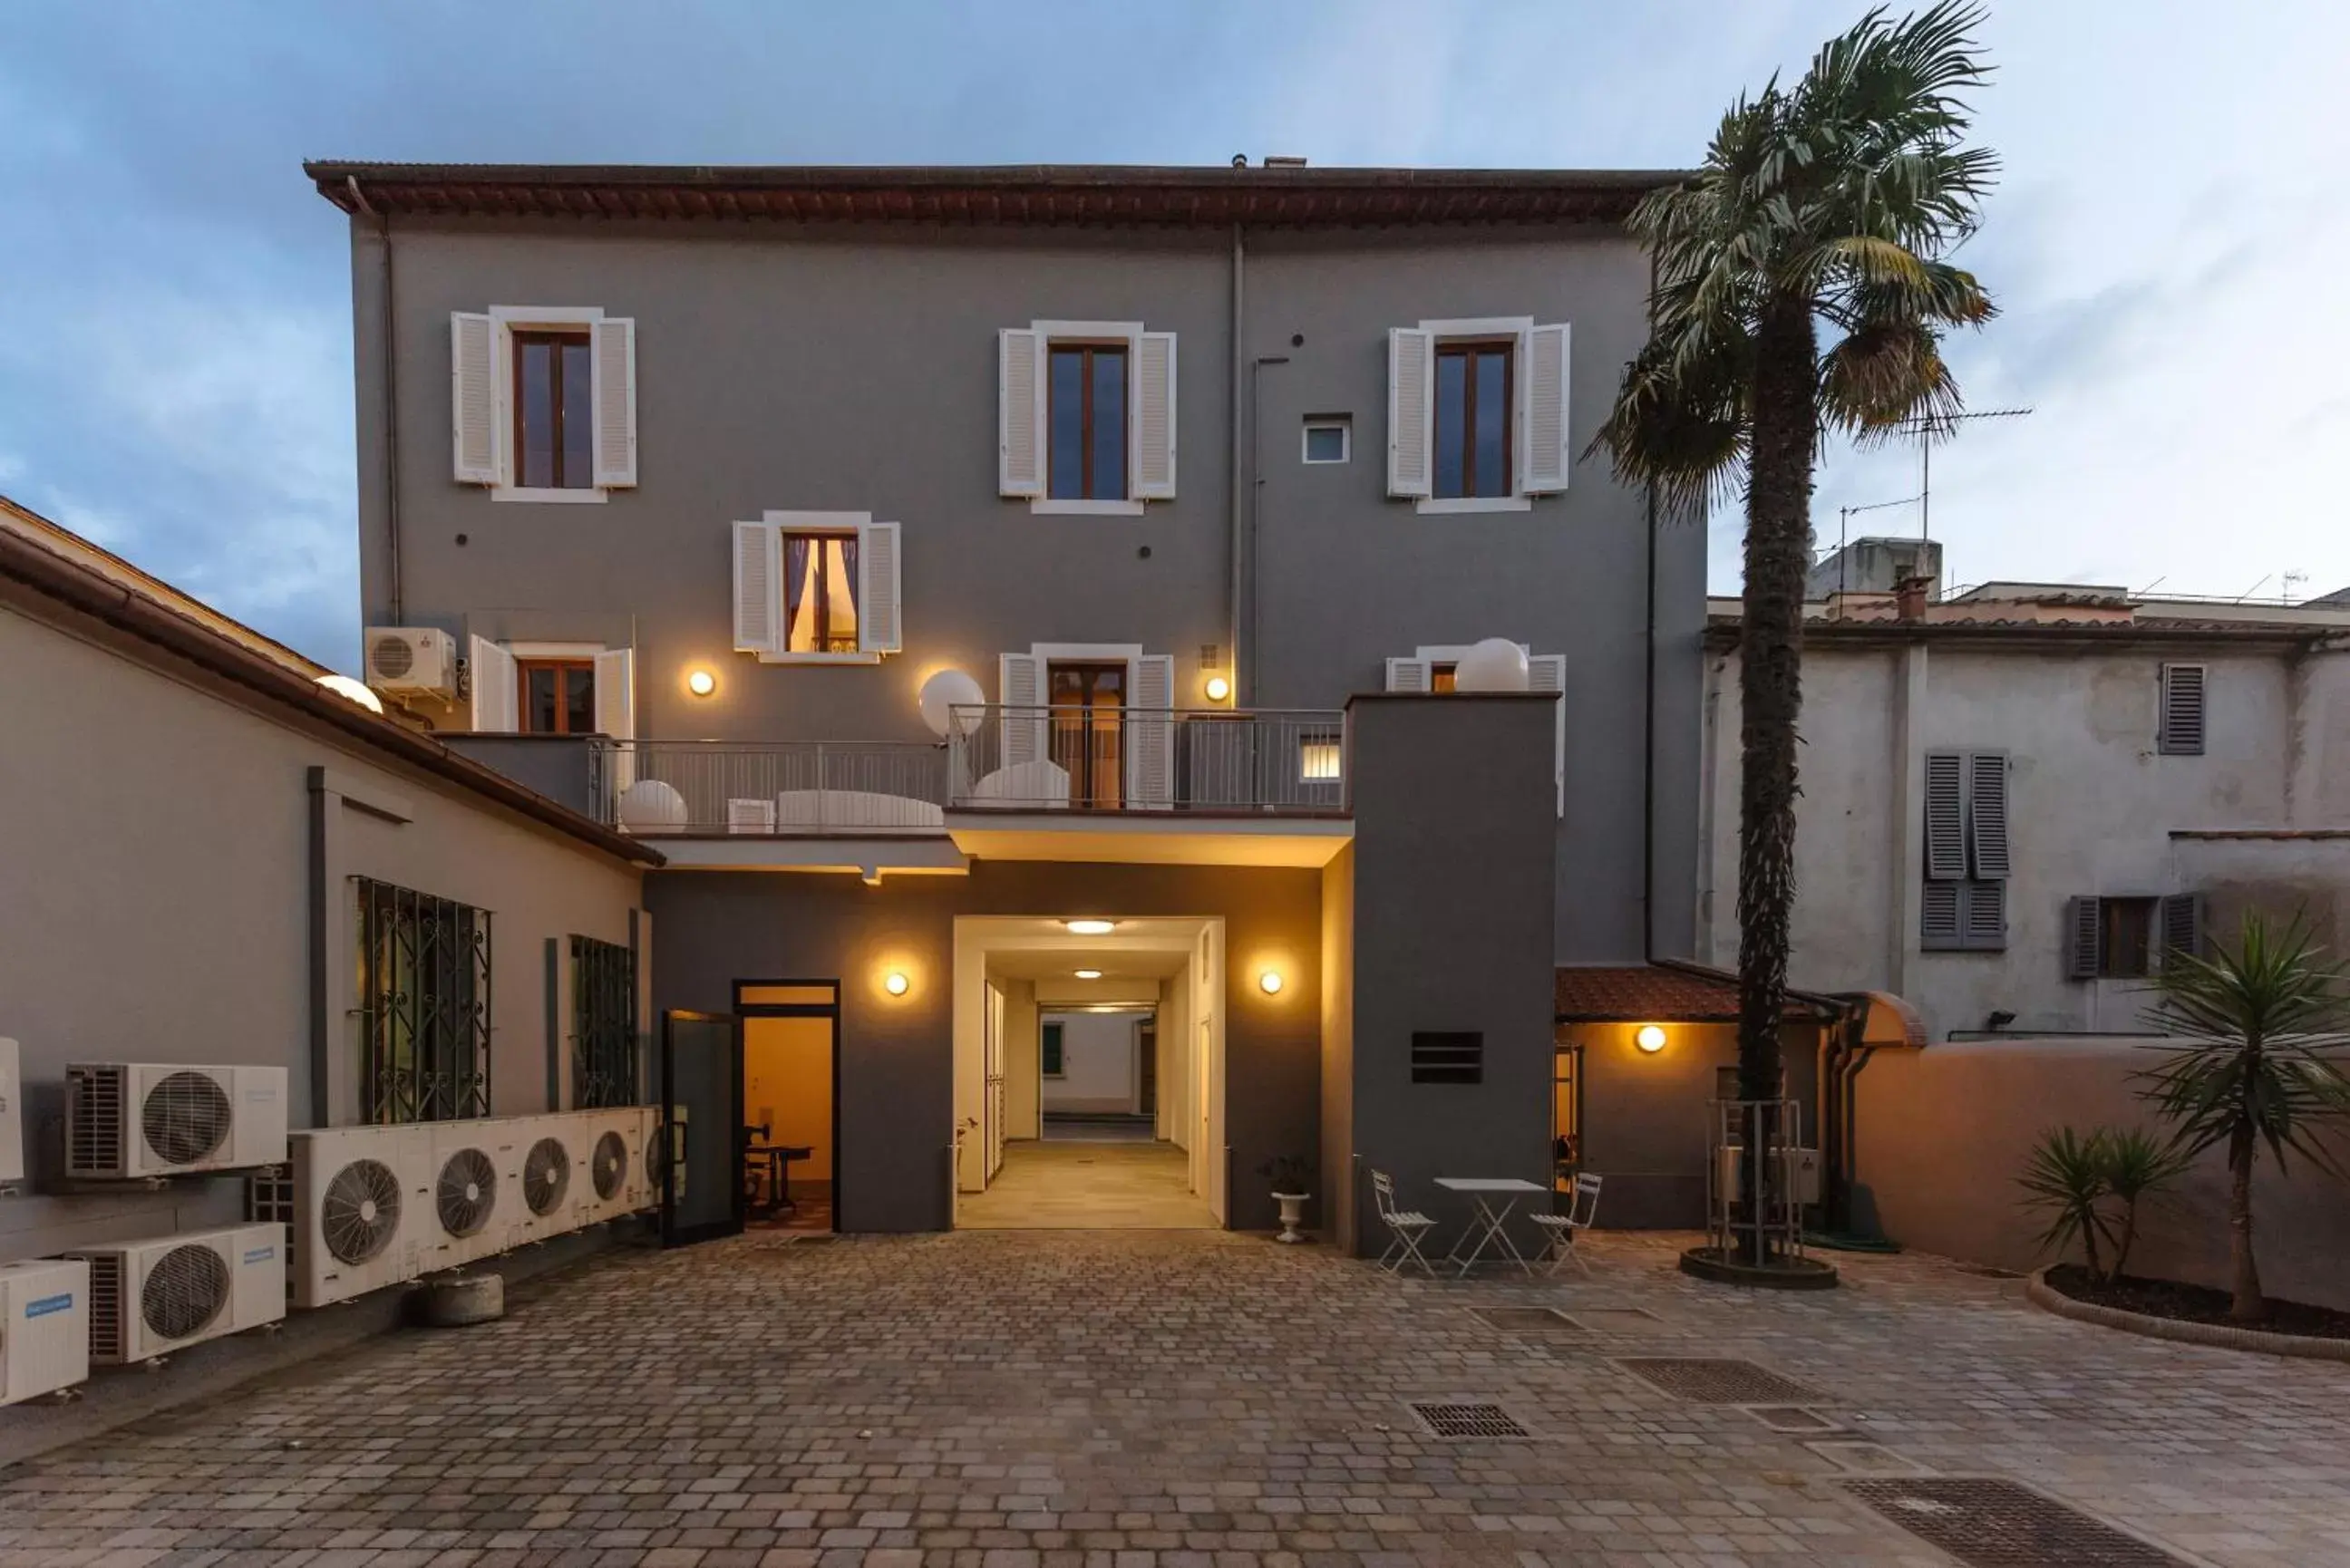 Area and facilities, Property Building in Residenza Cavour